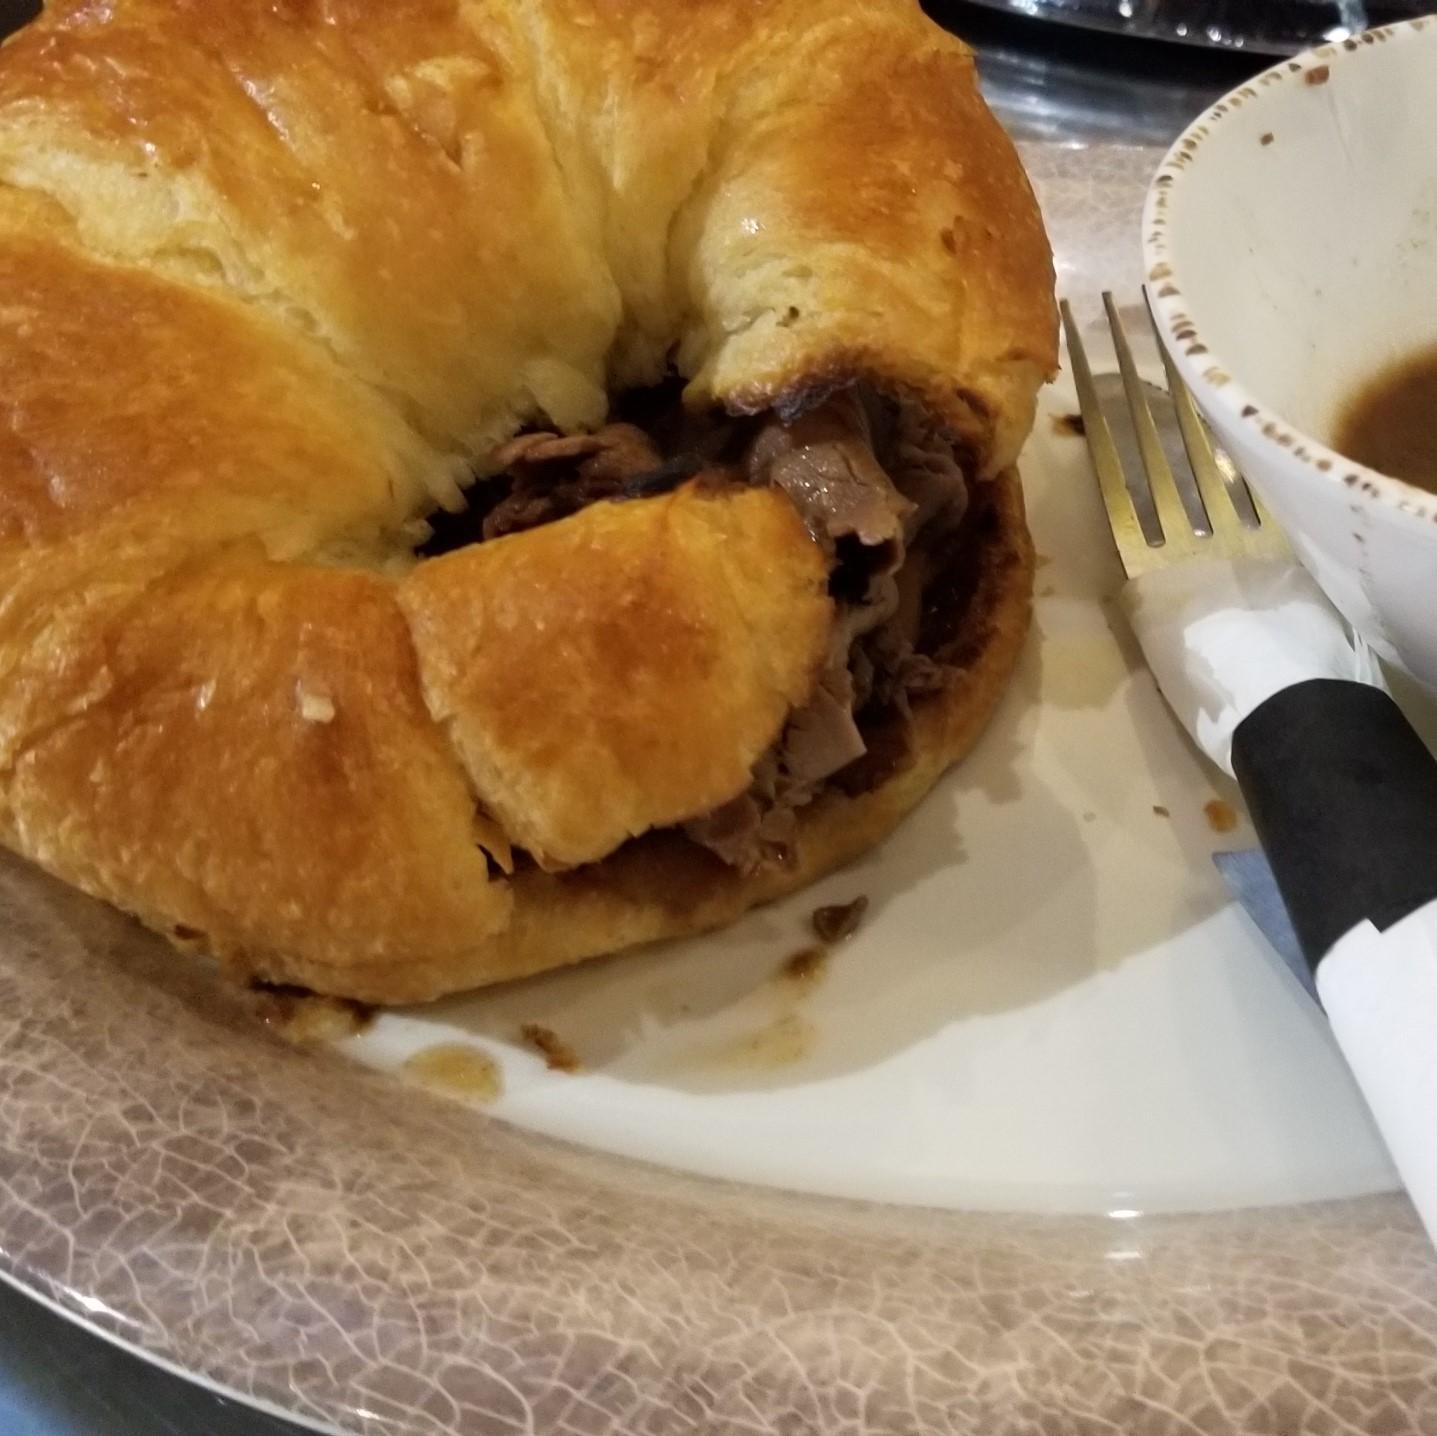 French Dip (served on a croissant)